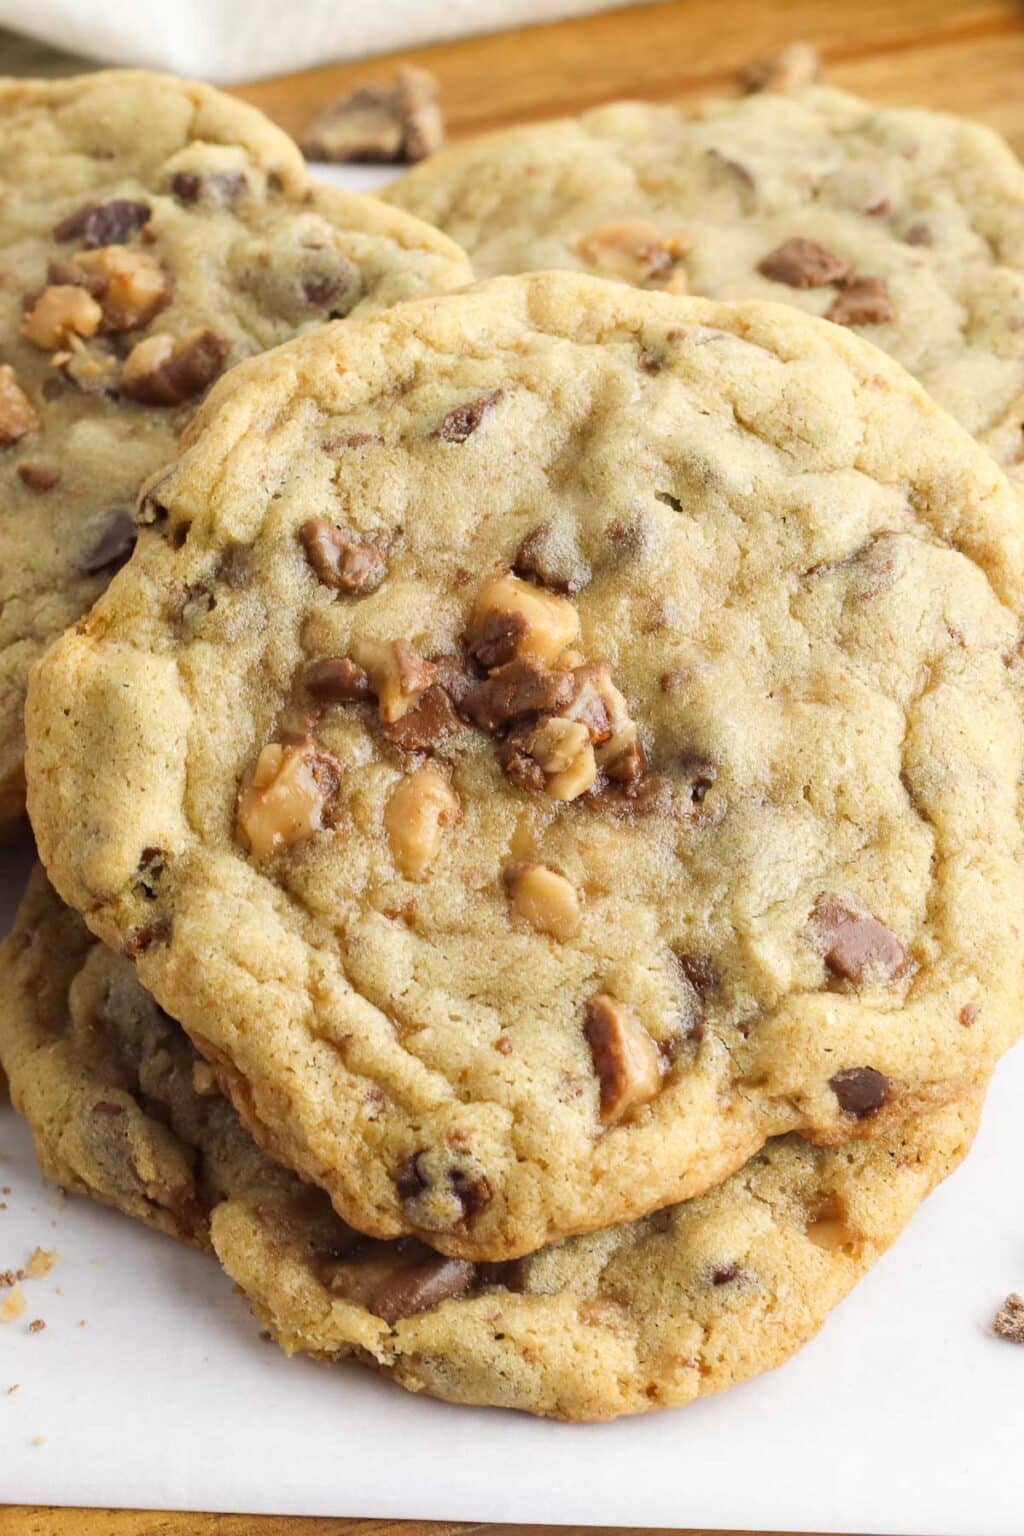 Toffee Cookies recipe - Buttery & Delicious! - Boulder Locavore